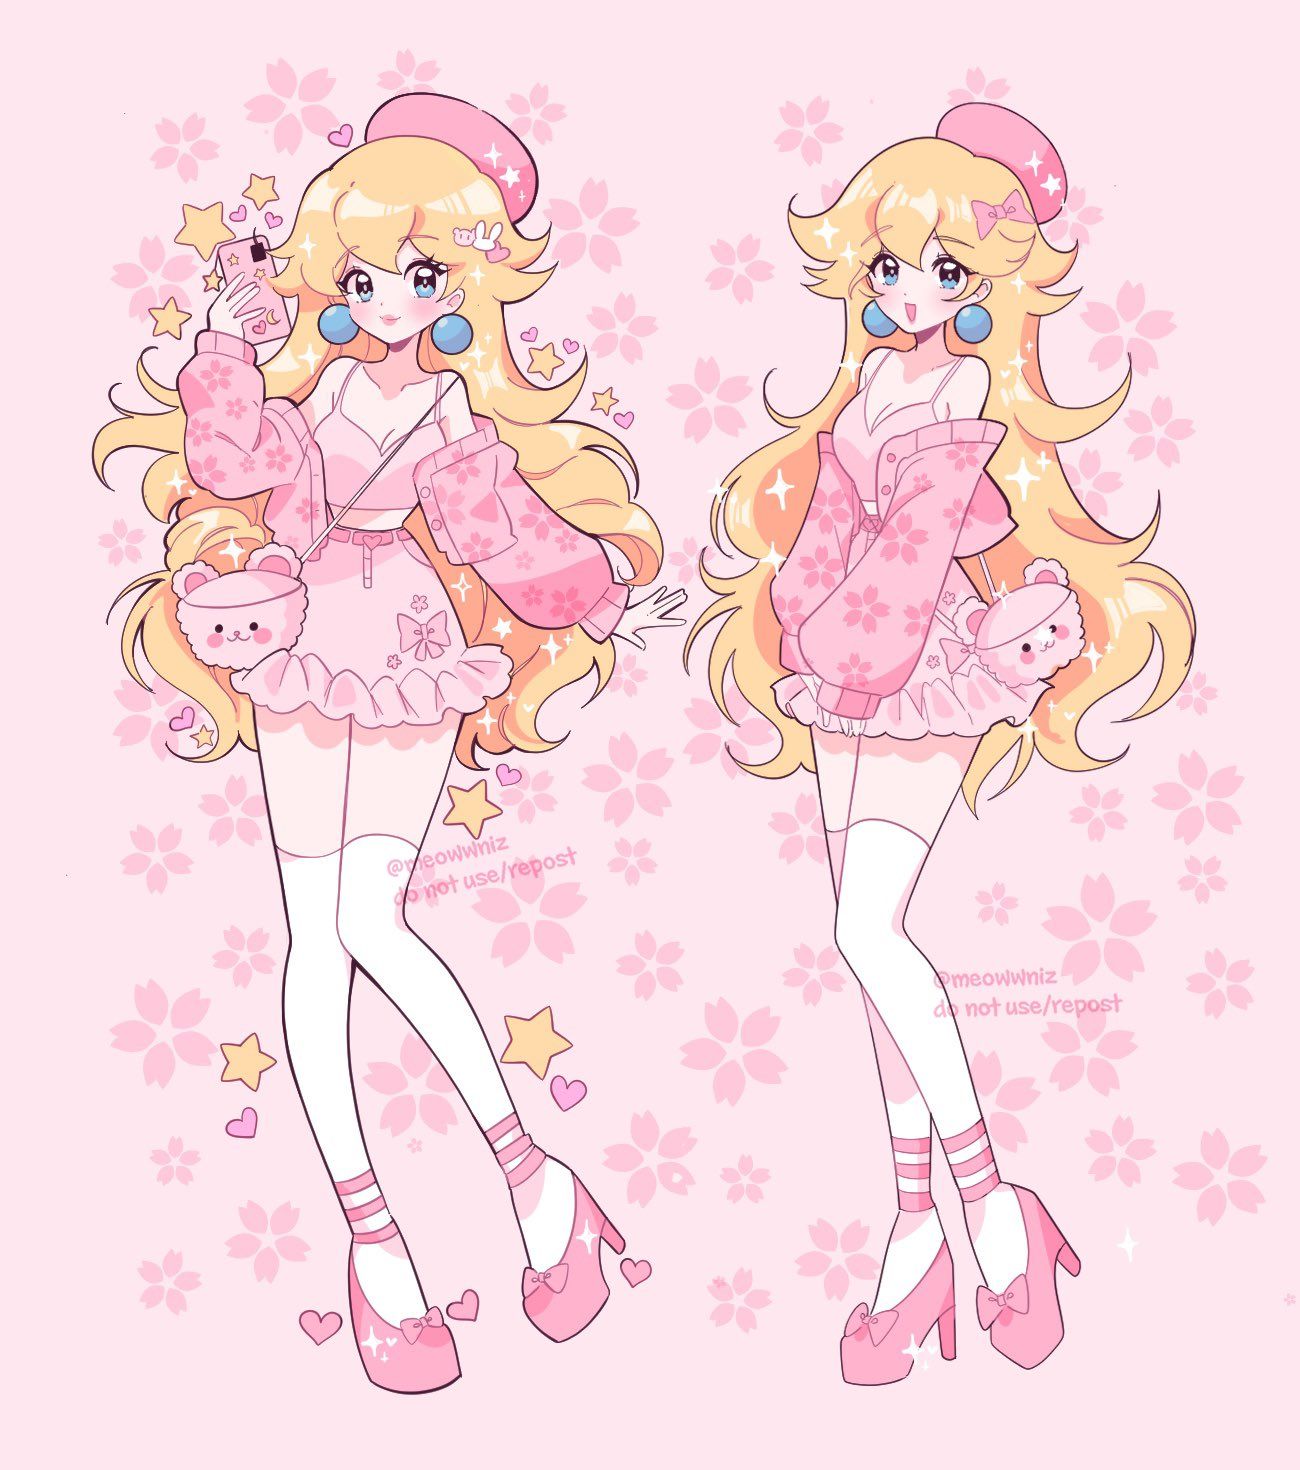 Star vs the forces of evil Commission - Princess Peach